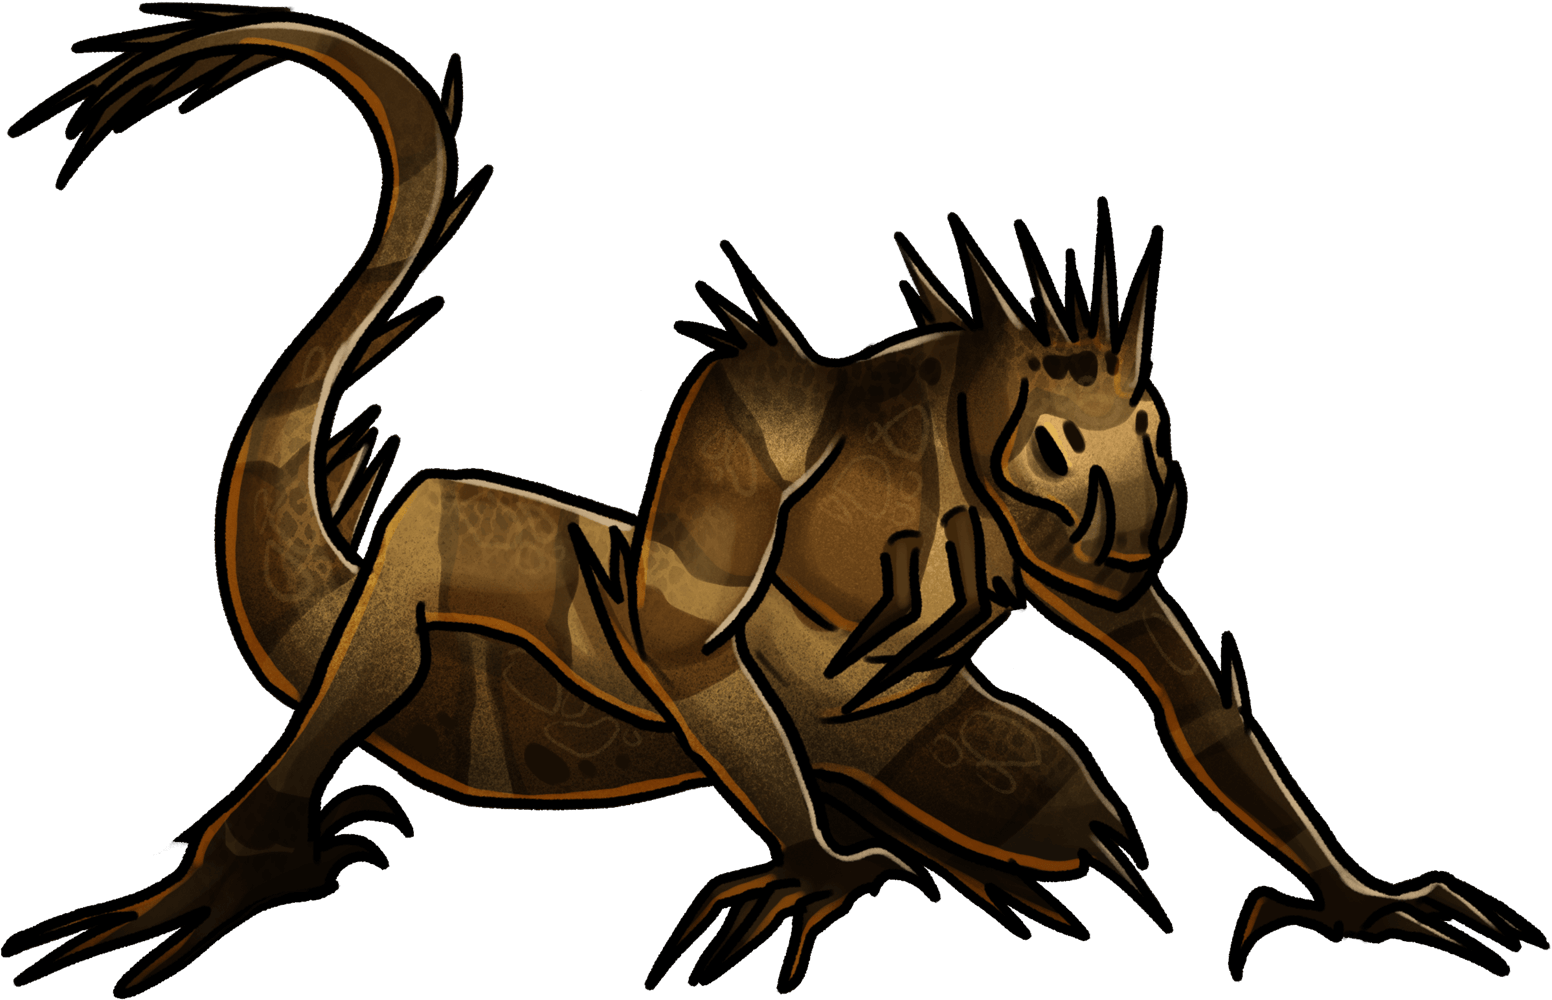 A large, lean lizard, vaguely humanoid in shape but primarily reptilian. Its lithe body is covered in sharp spikes, and its eyes are black as night. It creeps on all fours, long tail flicking silently behind it.